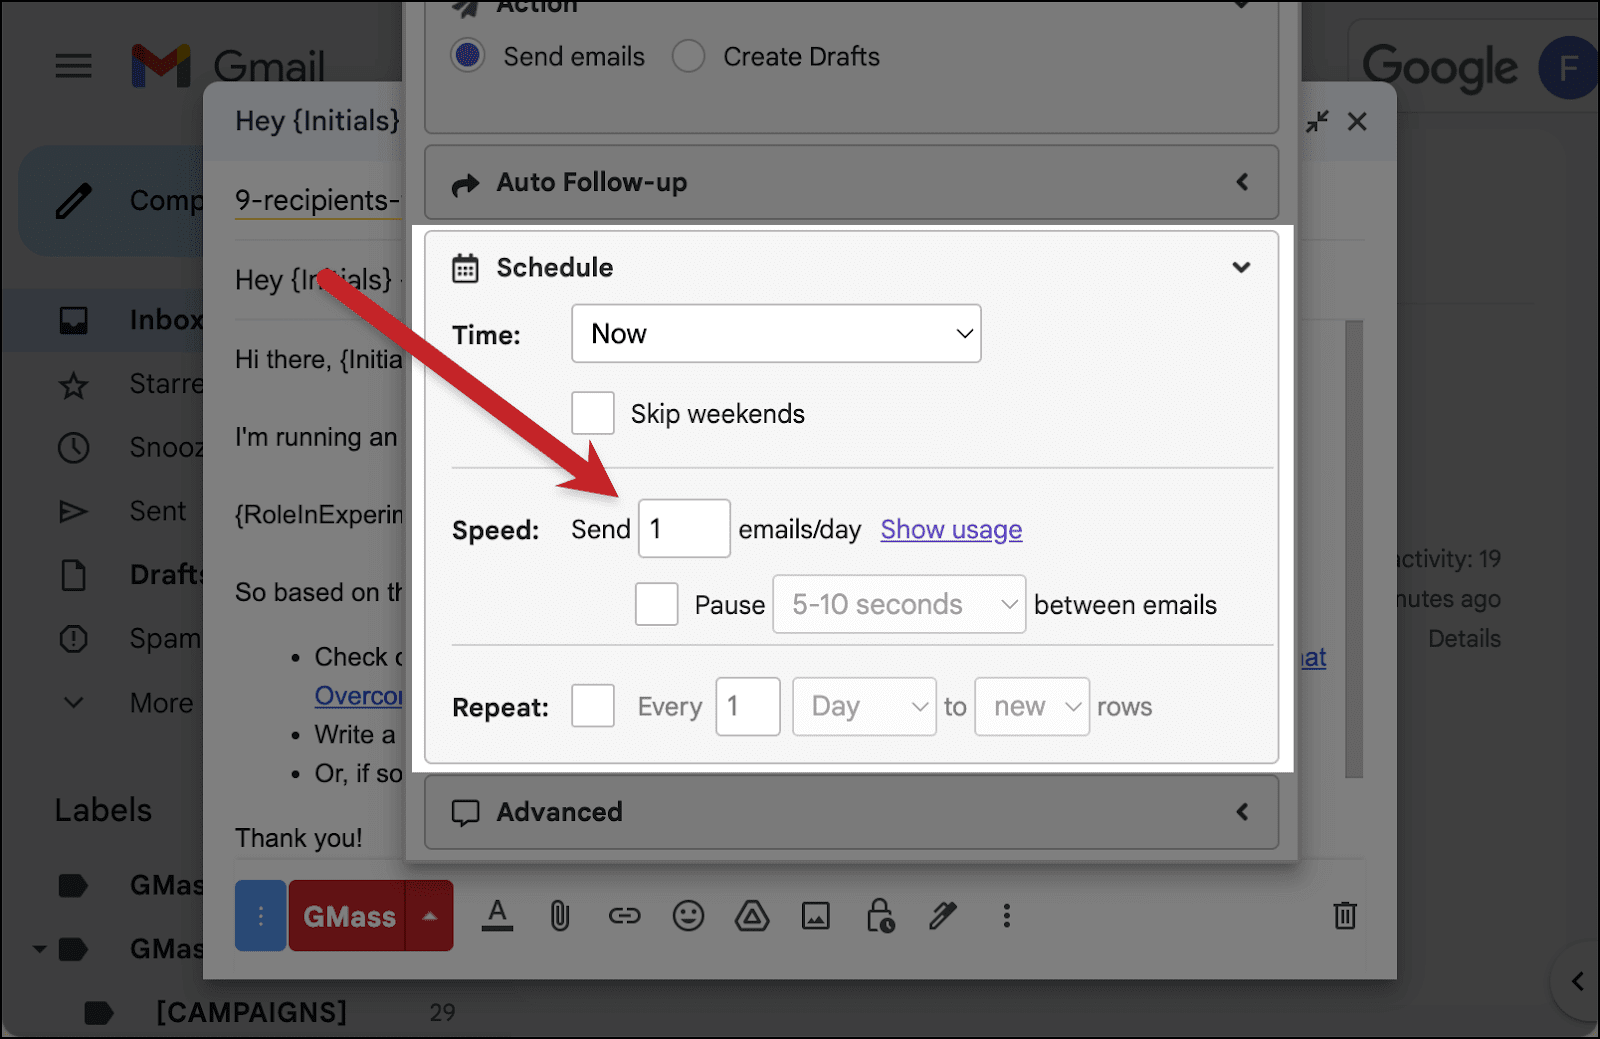 Set the initial speed to one email